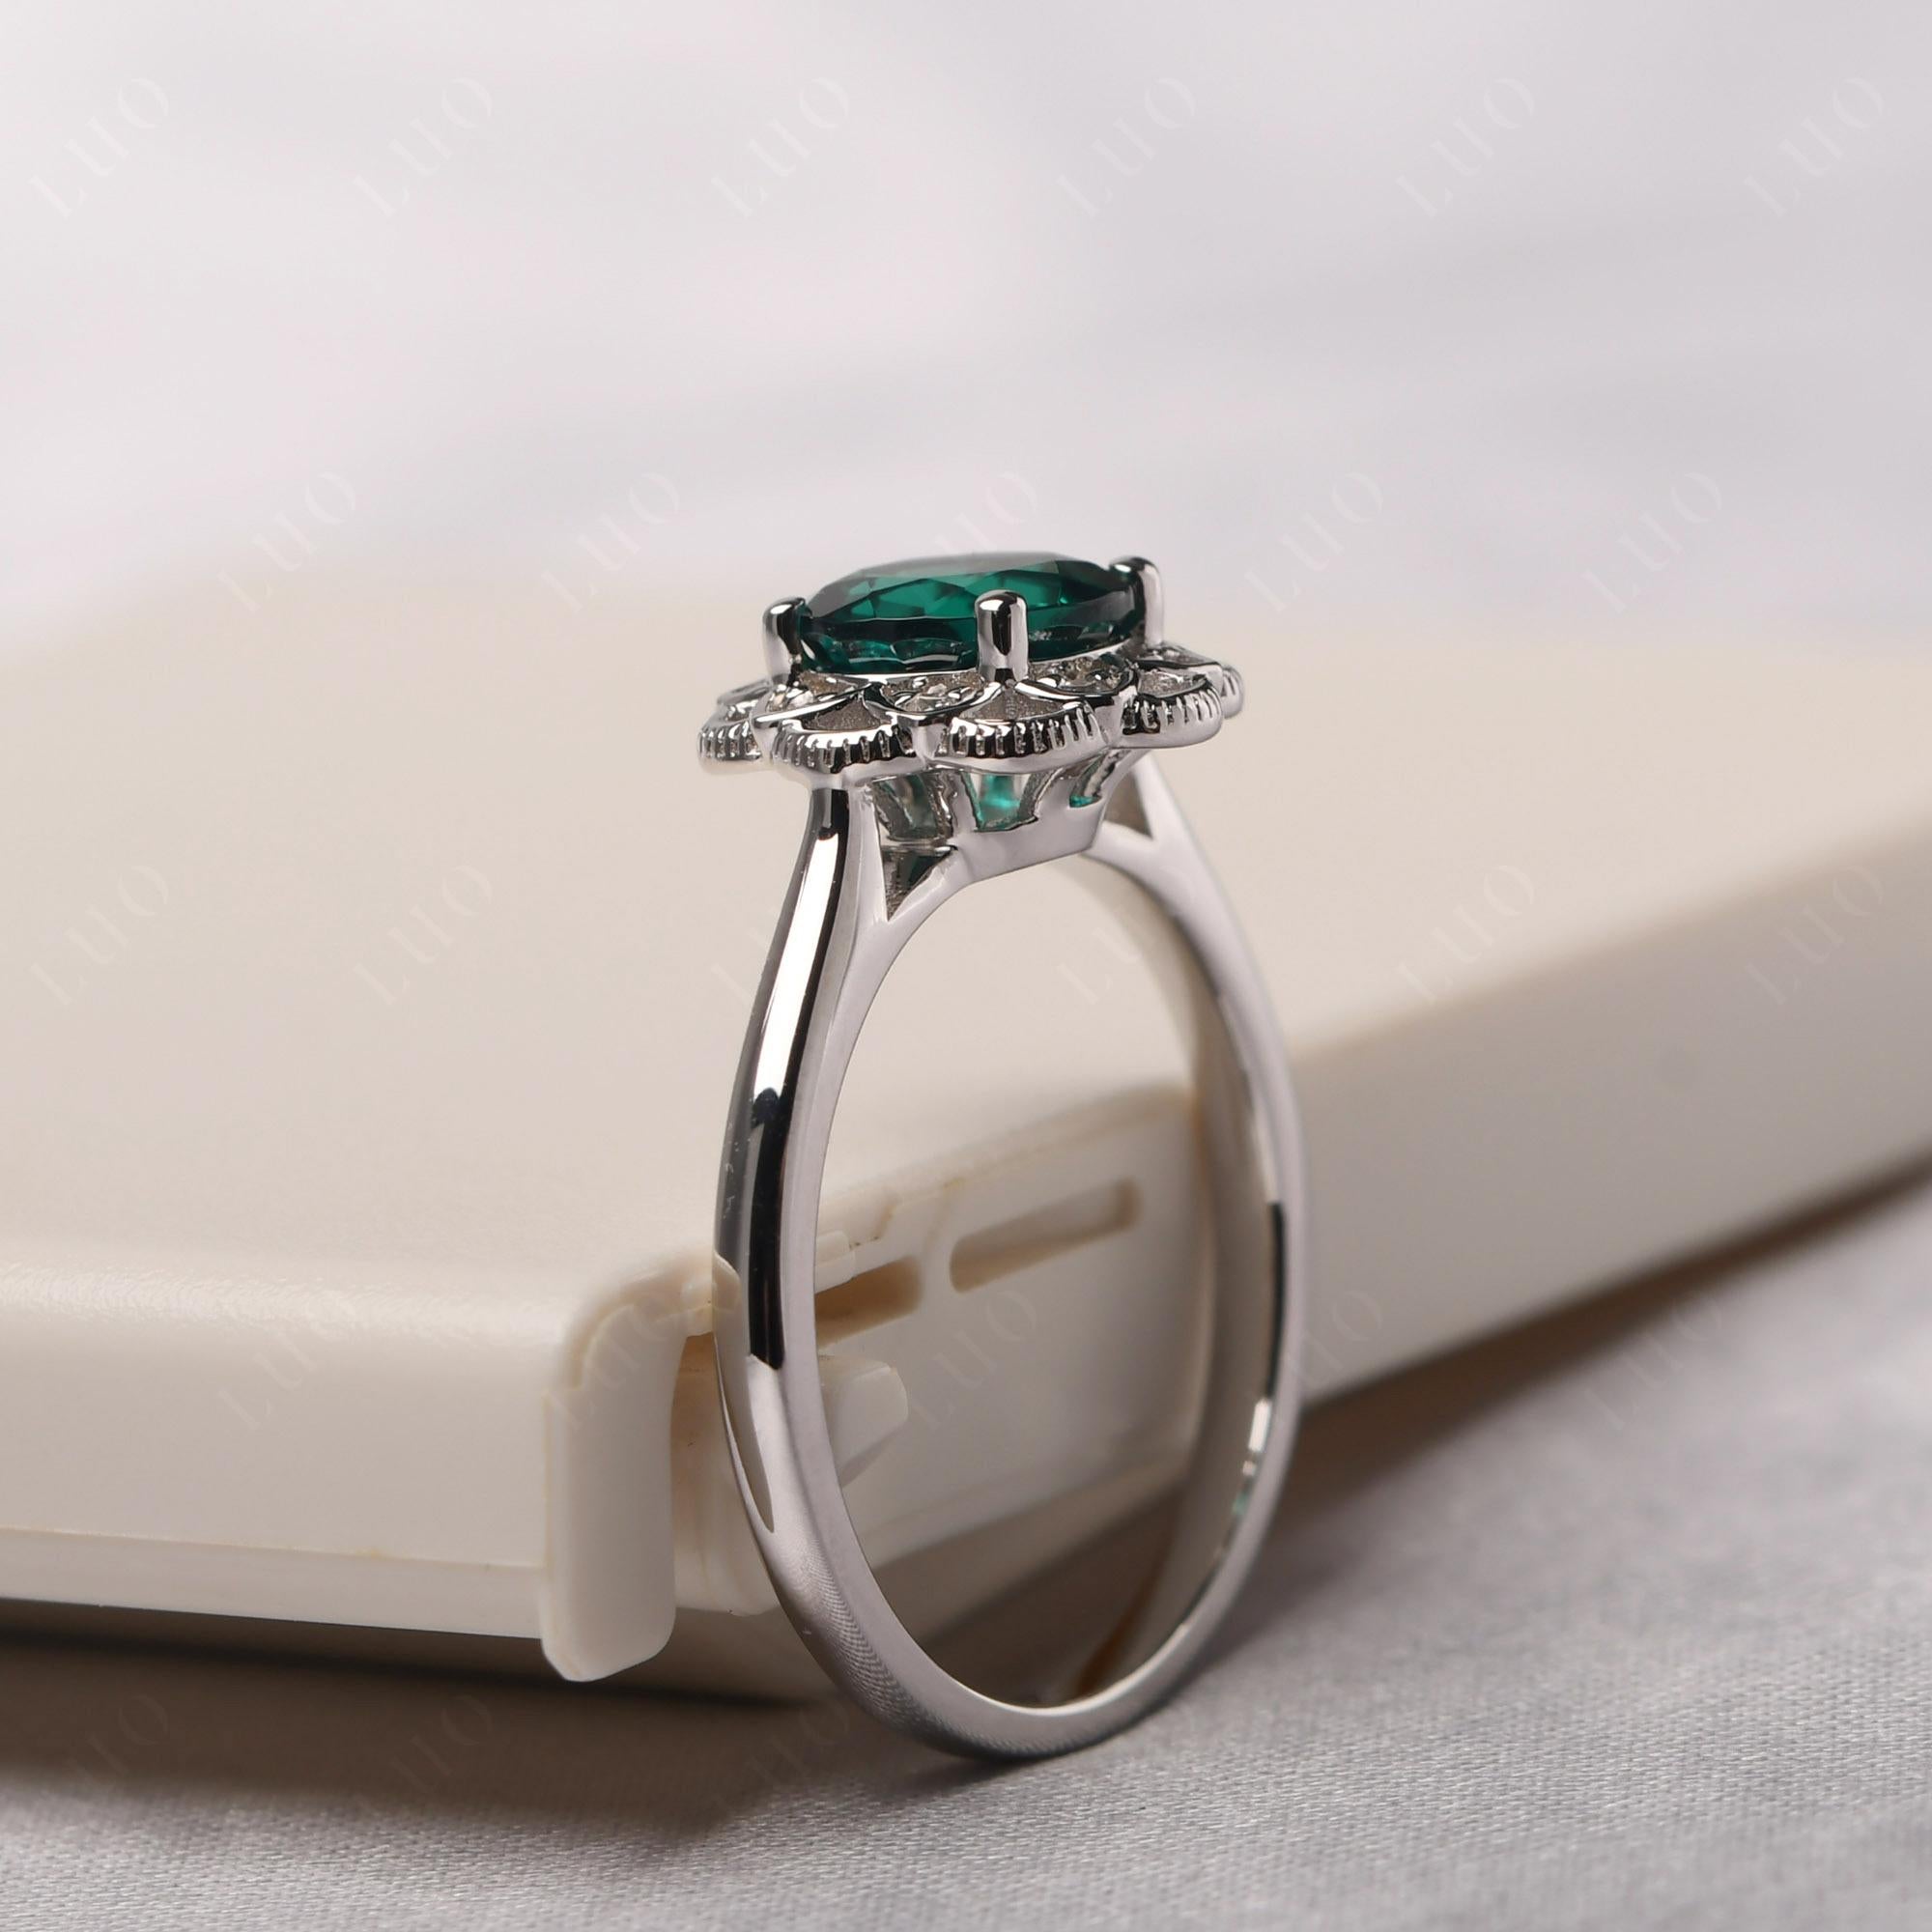 Emerald Vintage Inspired Filigree Ring - LUO Jewelry